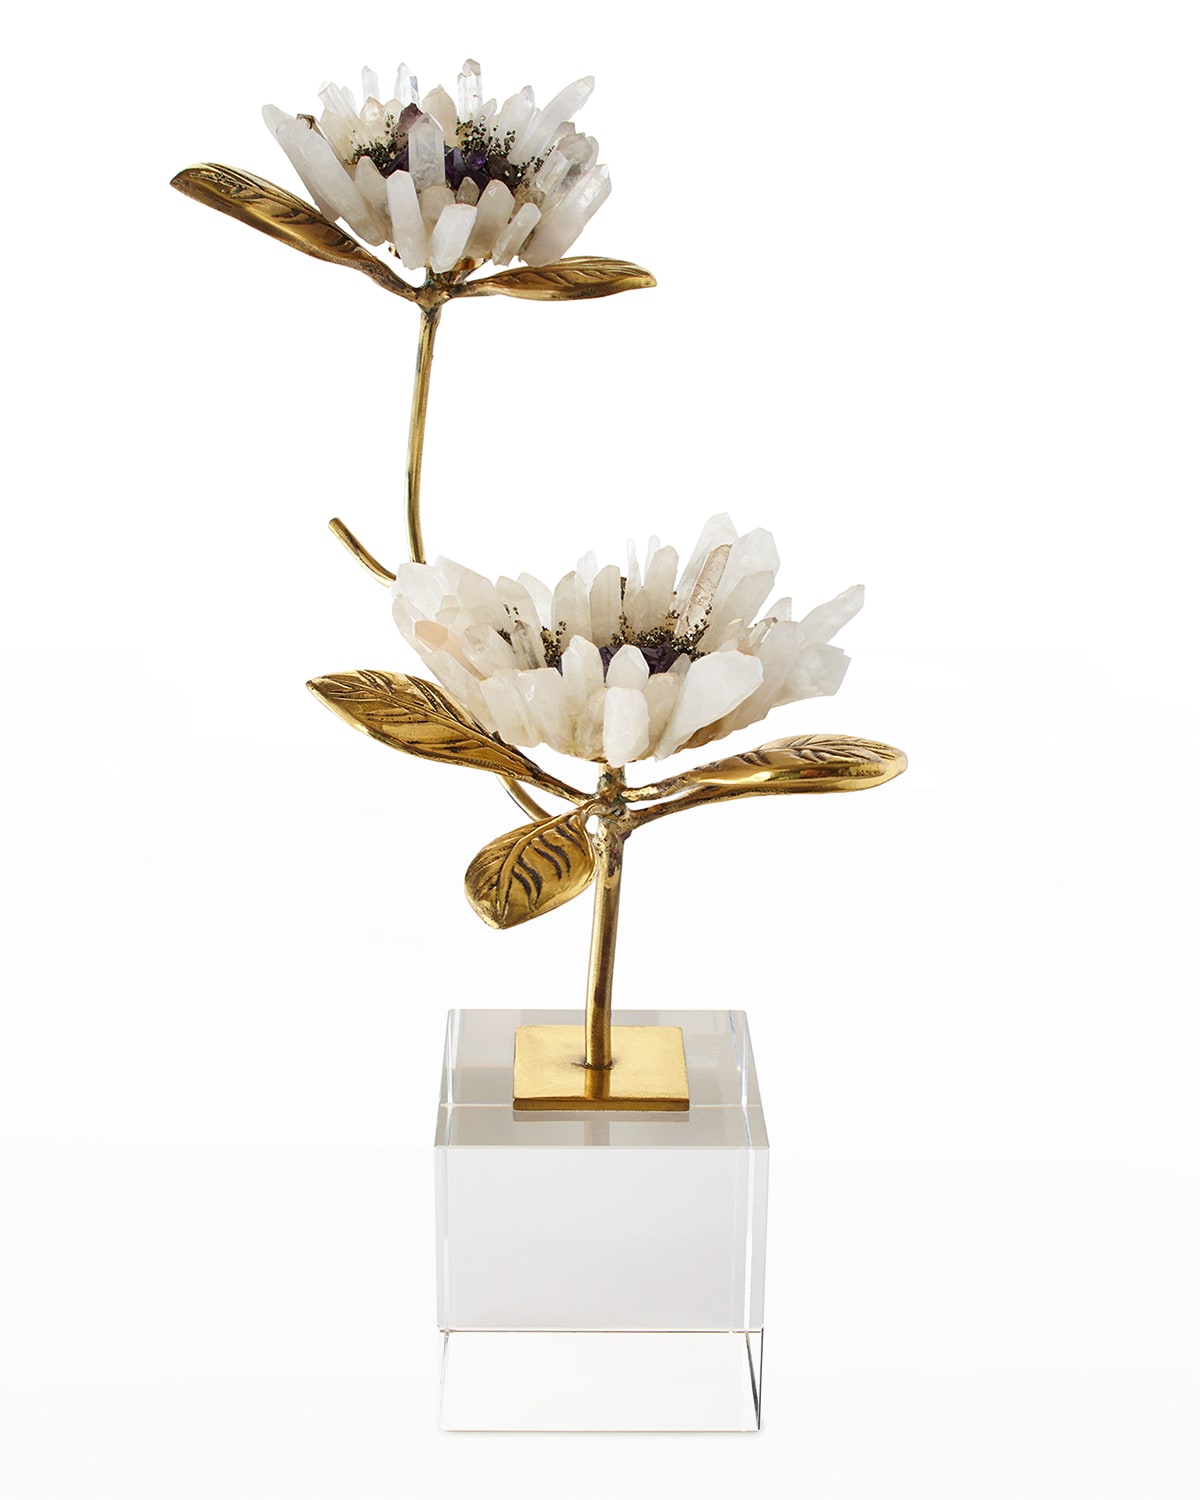 JOHN-RICHARD COLLECTION DOUBLE CRYSTAL BLOOM FLORAL SCULPTURE